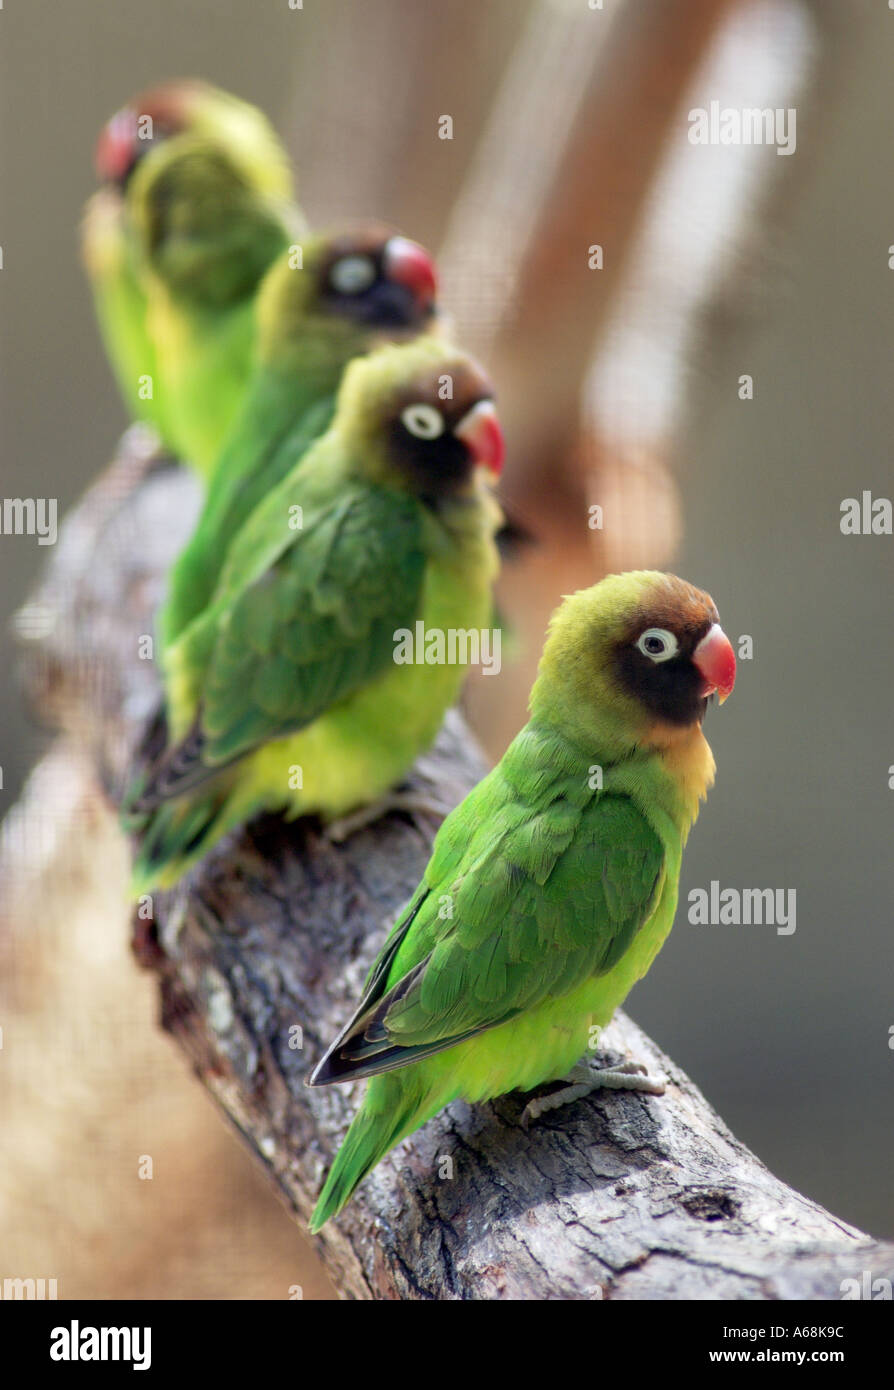 five lovebirds perched on a branch Stock Photo